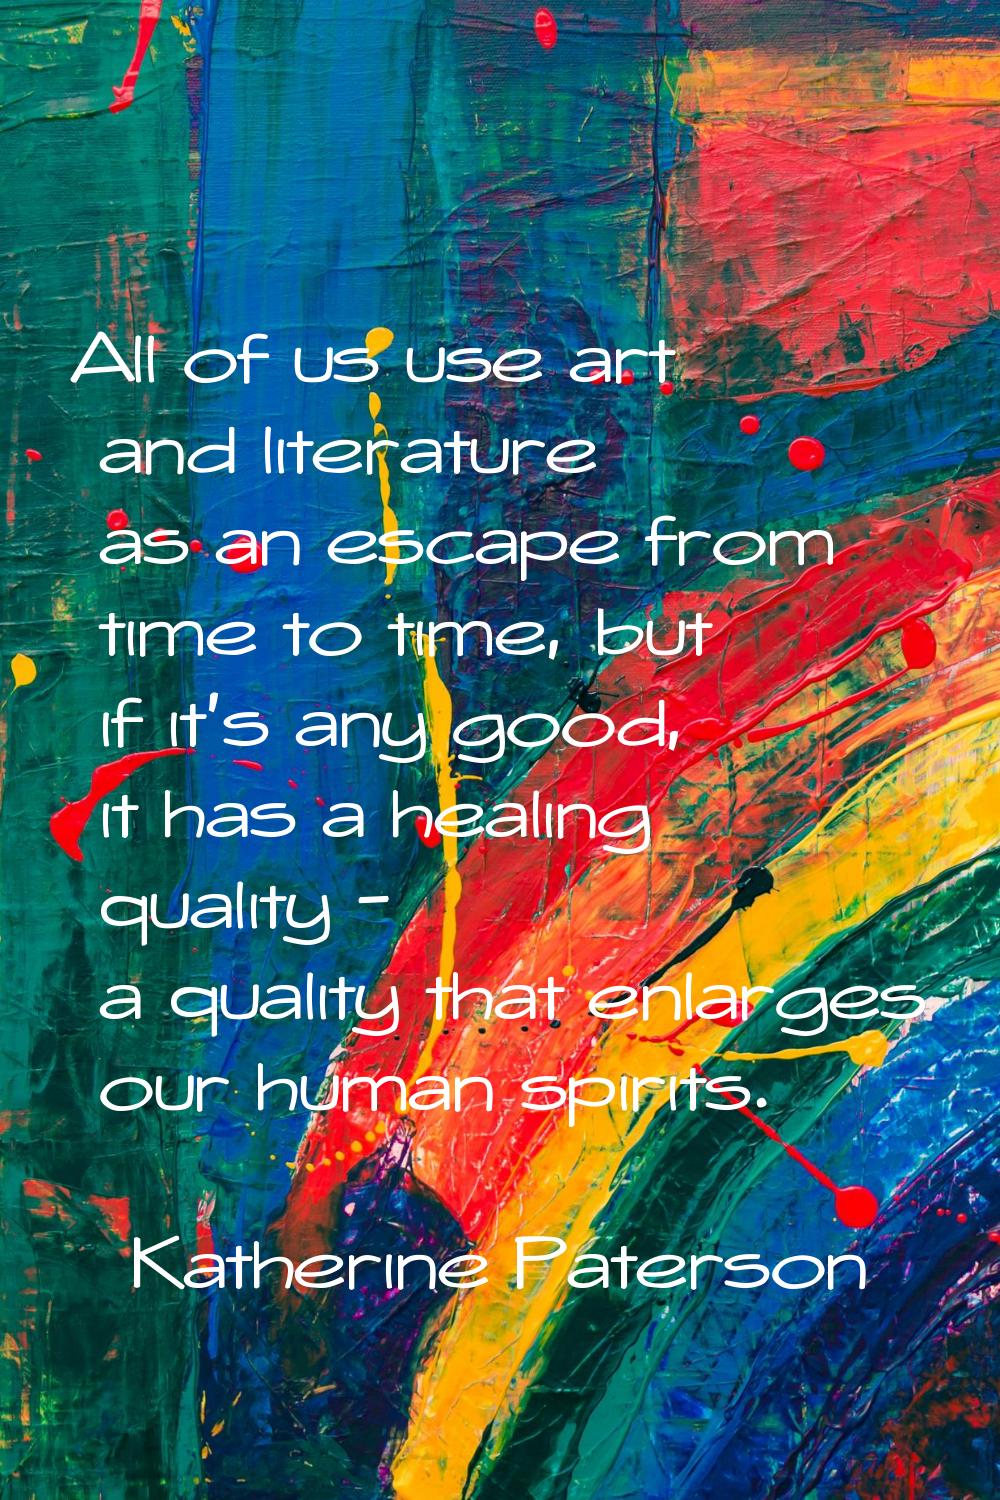 All of us use art and literature as an escape from time to time, but if it's any good, it has a hea